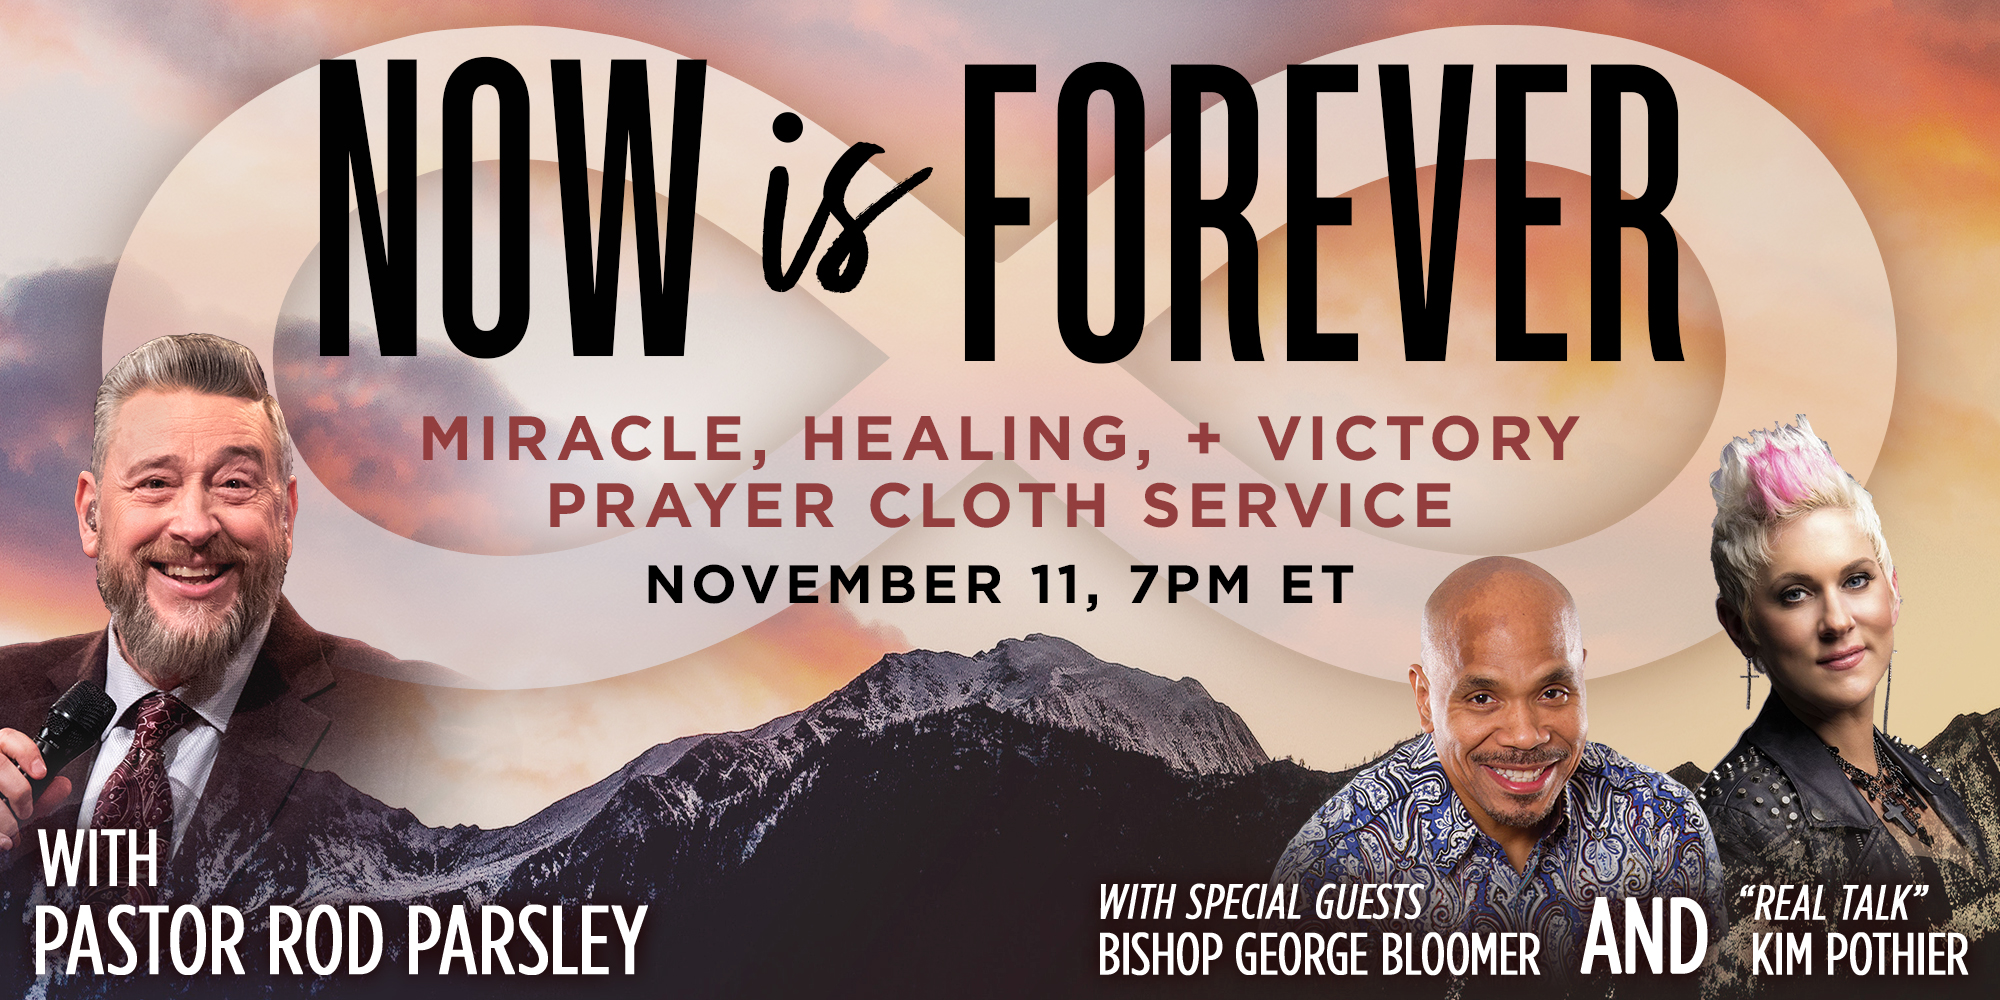 NOW IS FOREVER | MIRACLE, HEALING & PRAYER CLOTH SERVICE | NOVEMBER 11, 7PM ET | WITH PASTOR ROD PARSLEY | WITH SPECIAL GUESTS | BISHOP GEORGE BLOOMER & -REAL TALK- KIM POTHIER